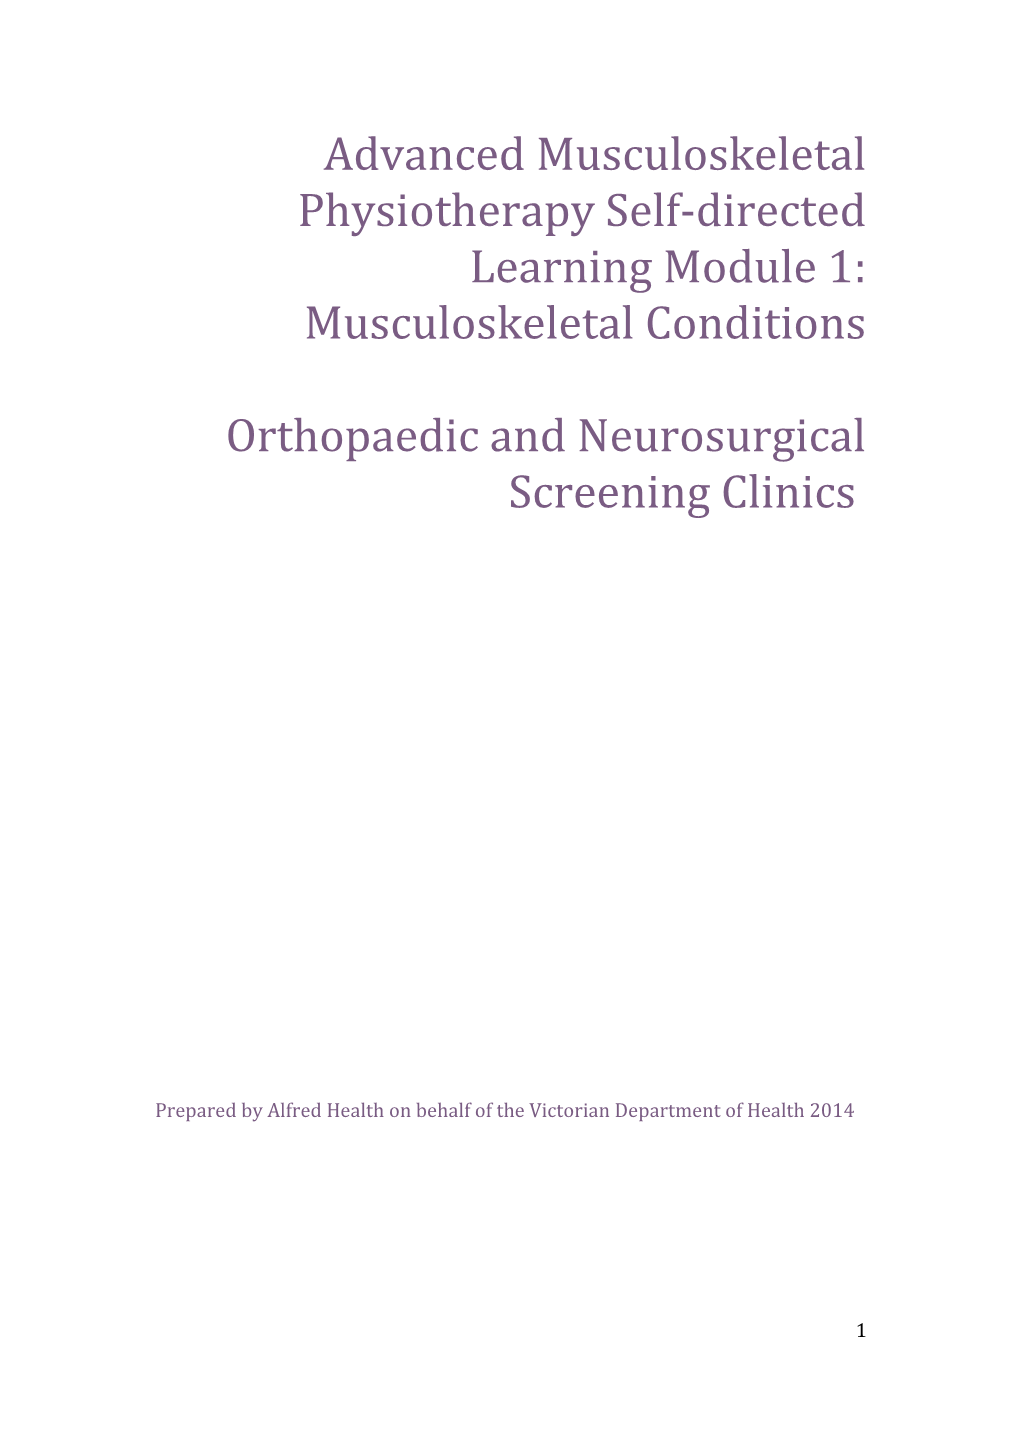 Advanced Musculoskeletal Physiotherapy Self-Directed Learning Module 1: Musculoskeletal